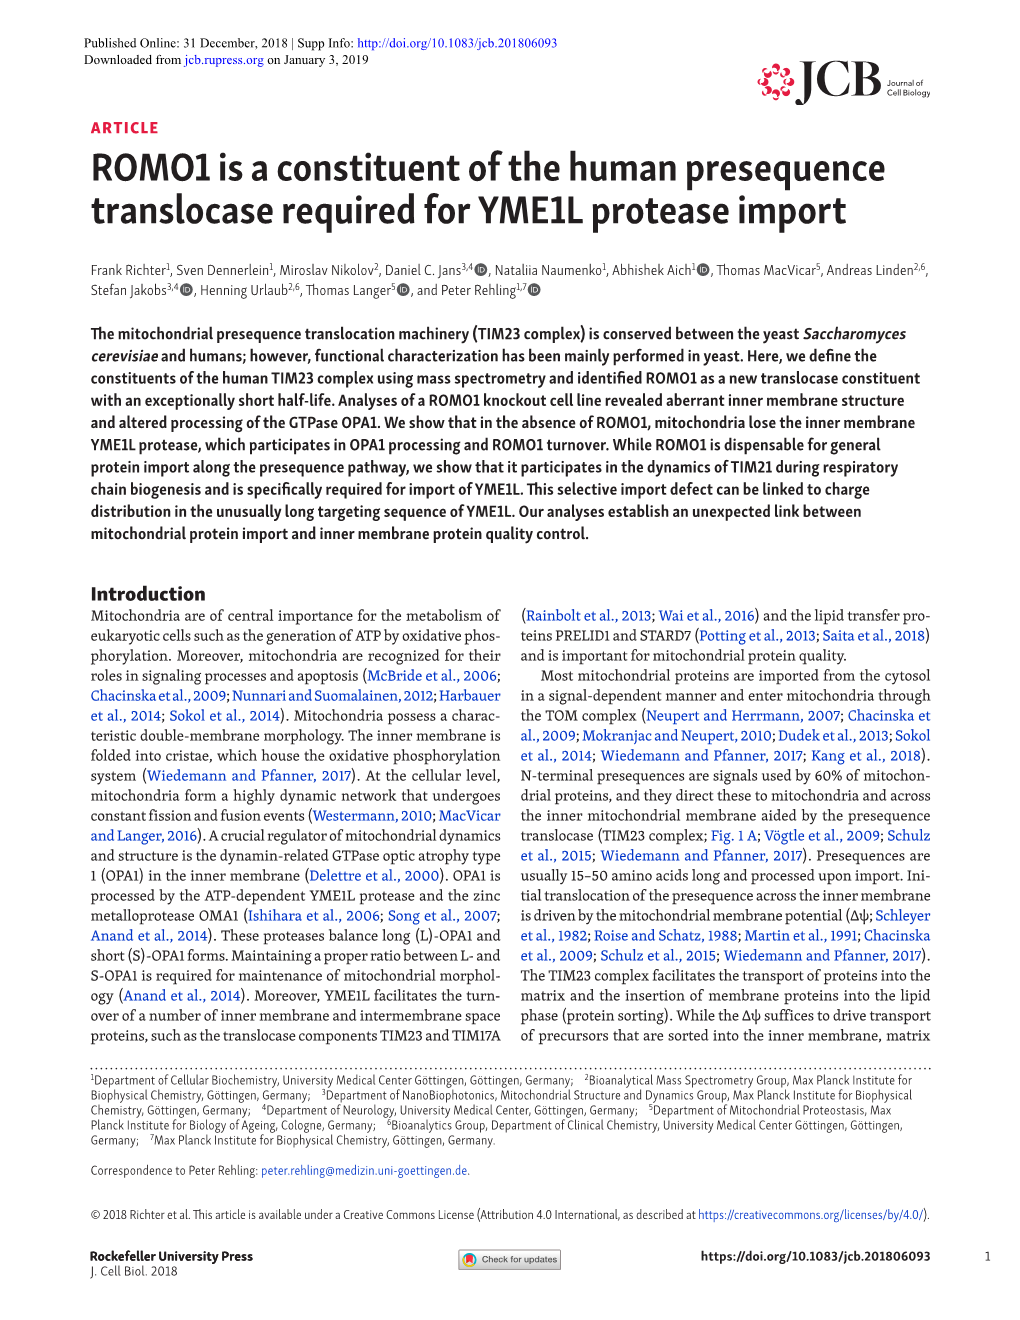 ROMO1 Is a Constituent of the Human Presequence Translocase Required for YME1L Protease Import